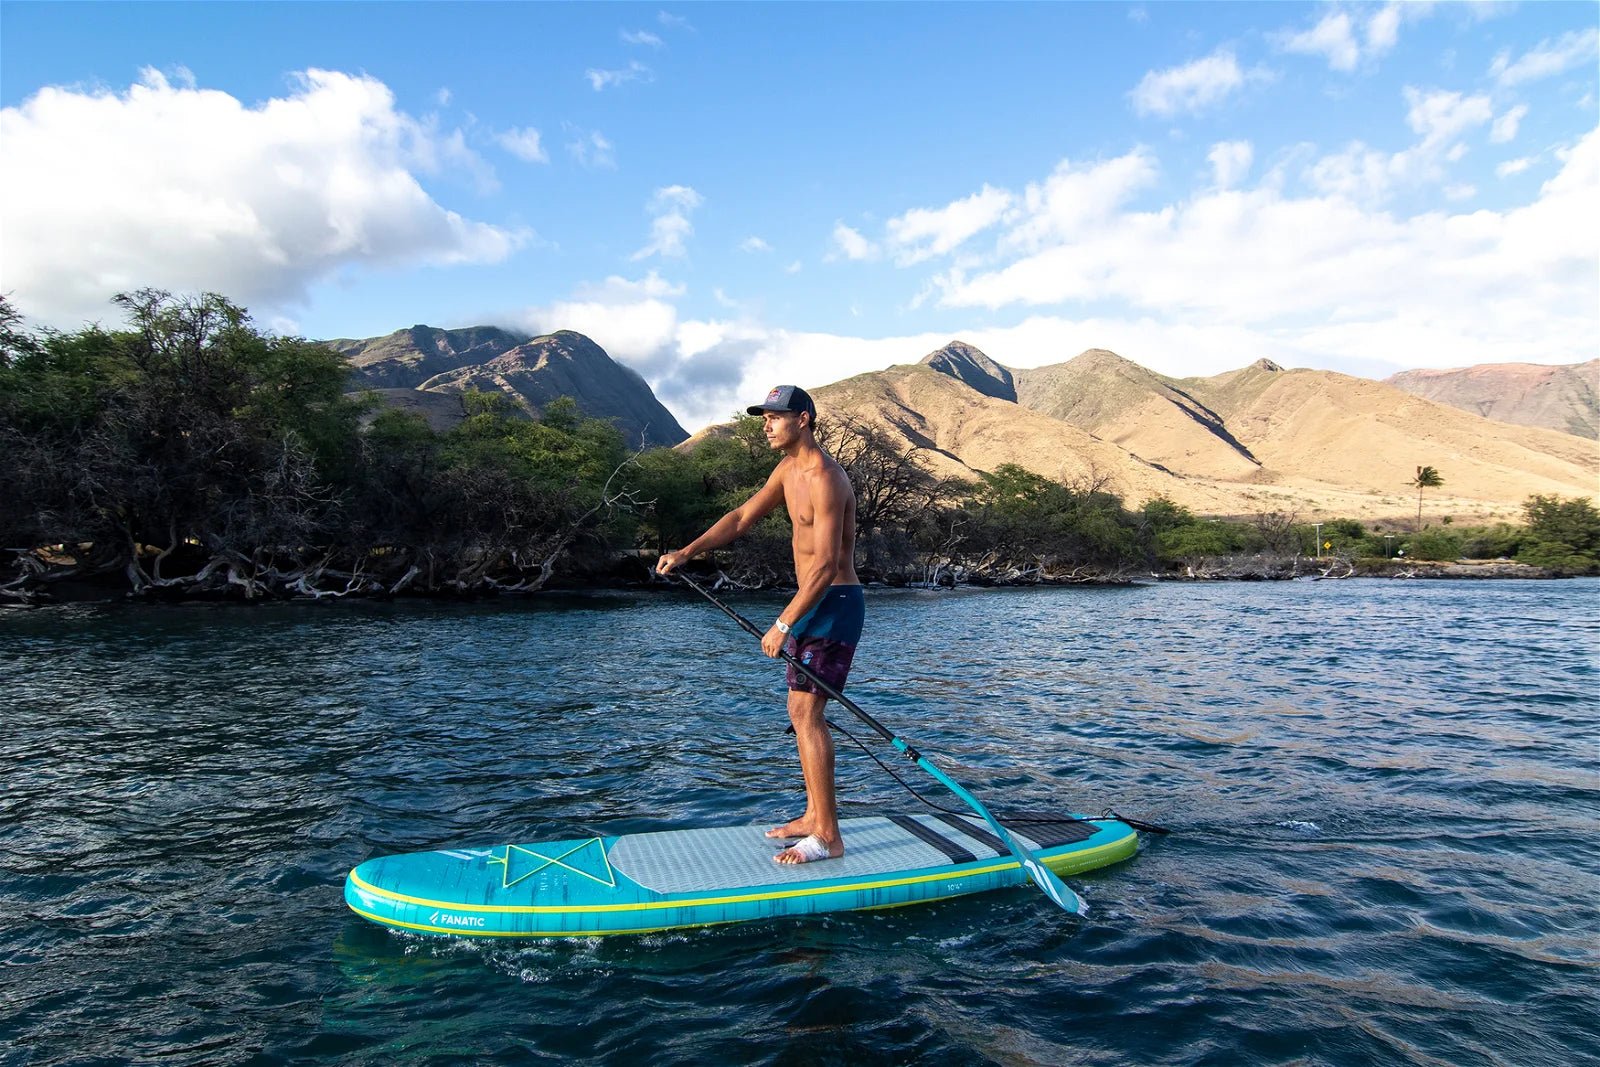 Fanatic Package Fly Air Premium/Pure 2022 iSUP Paddleboard - Worthing Watersports - 9008415938452 - iSUP Packages - Fanatic SUP